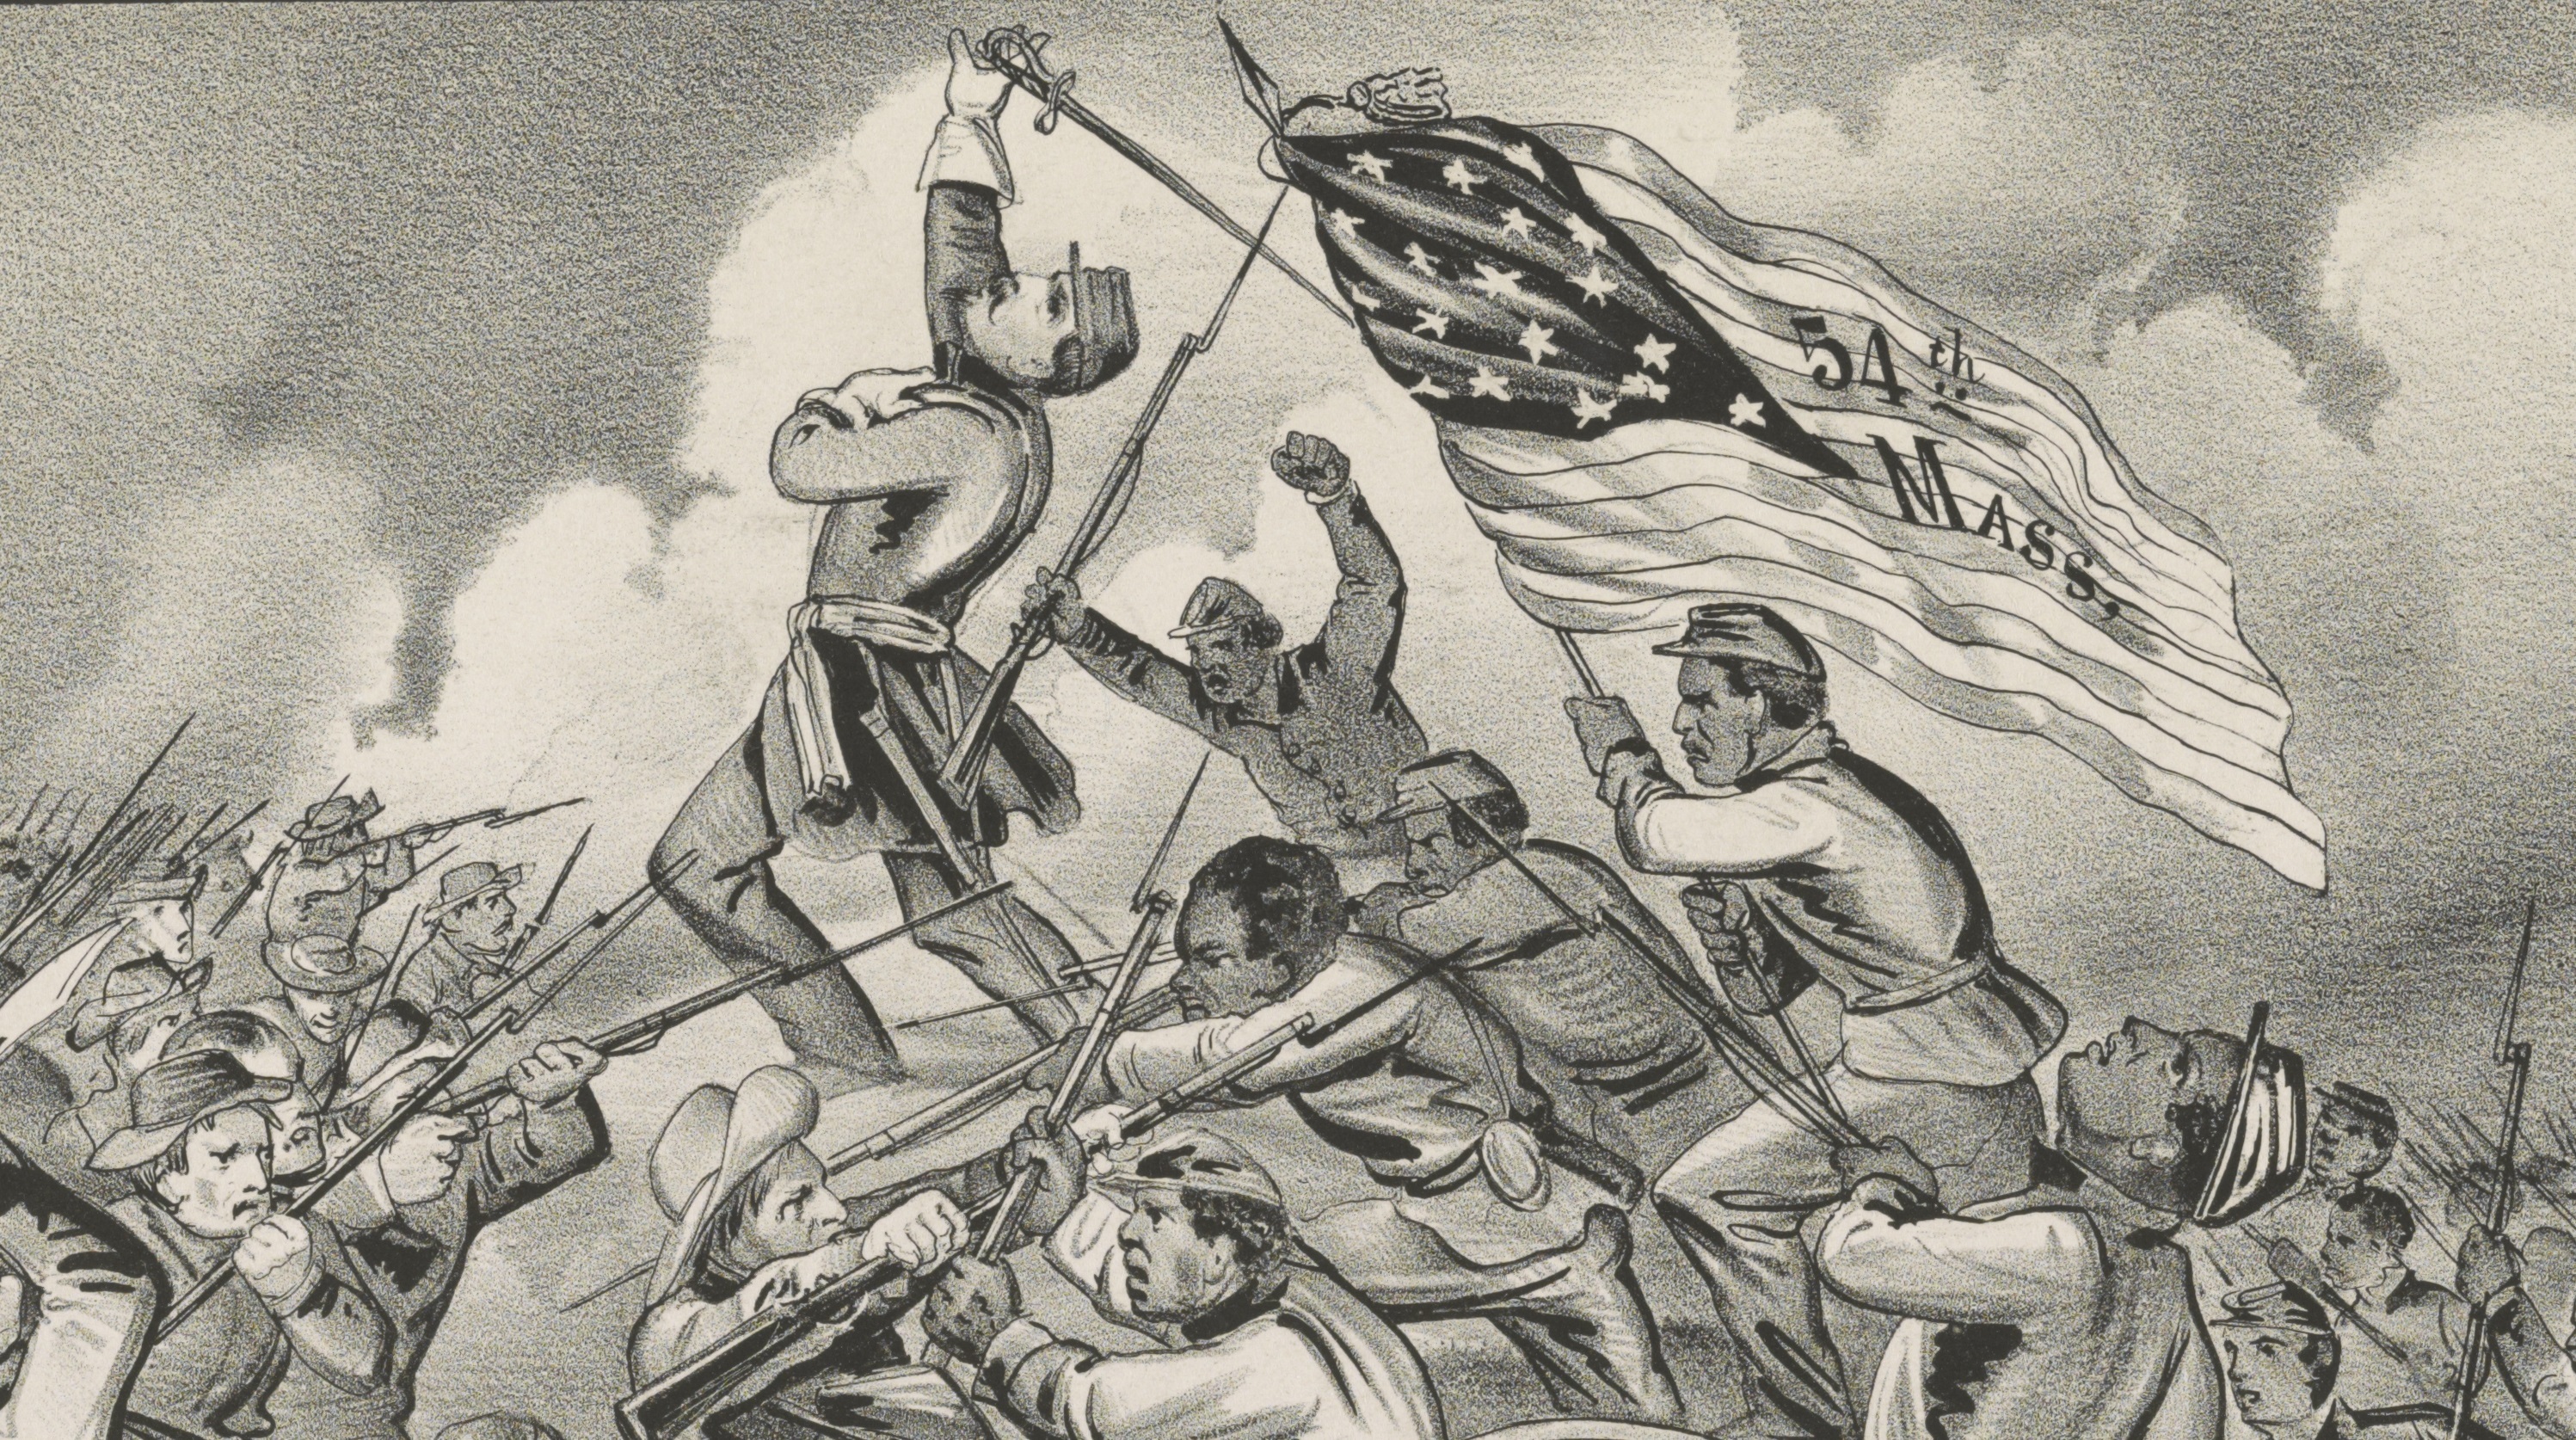 Black and white drawing of Confederate and Union soldiers engaged in combat with their weapons. A Black soldier holds an American flag that has the words "54th Mass" written across it.